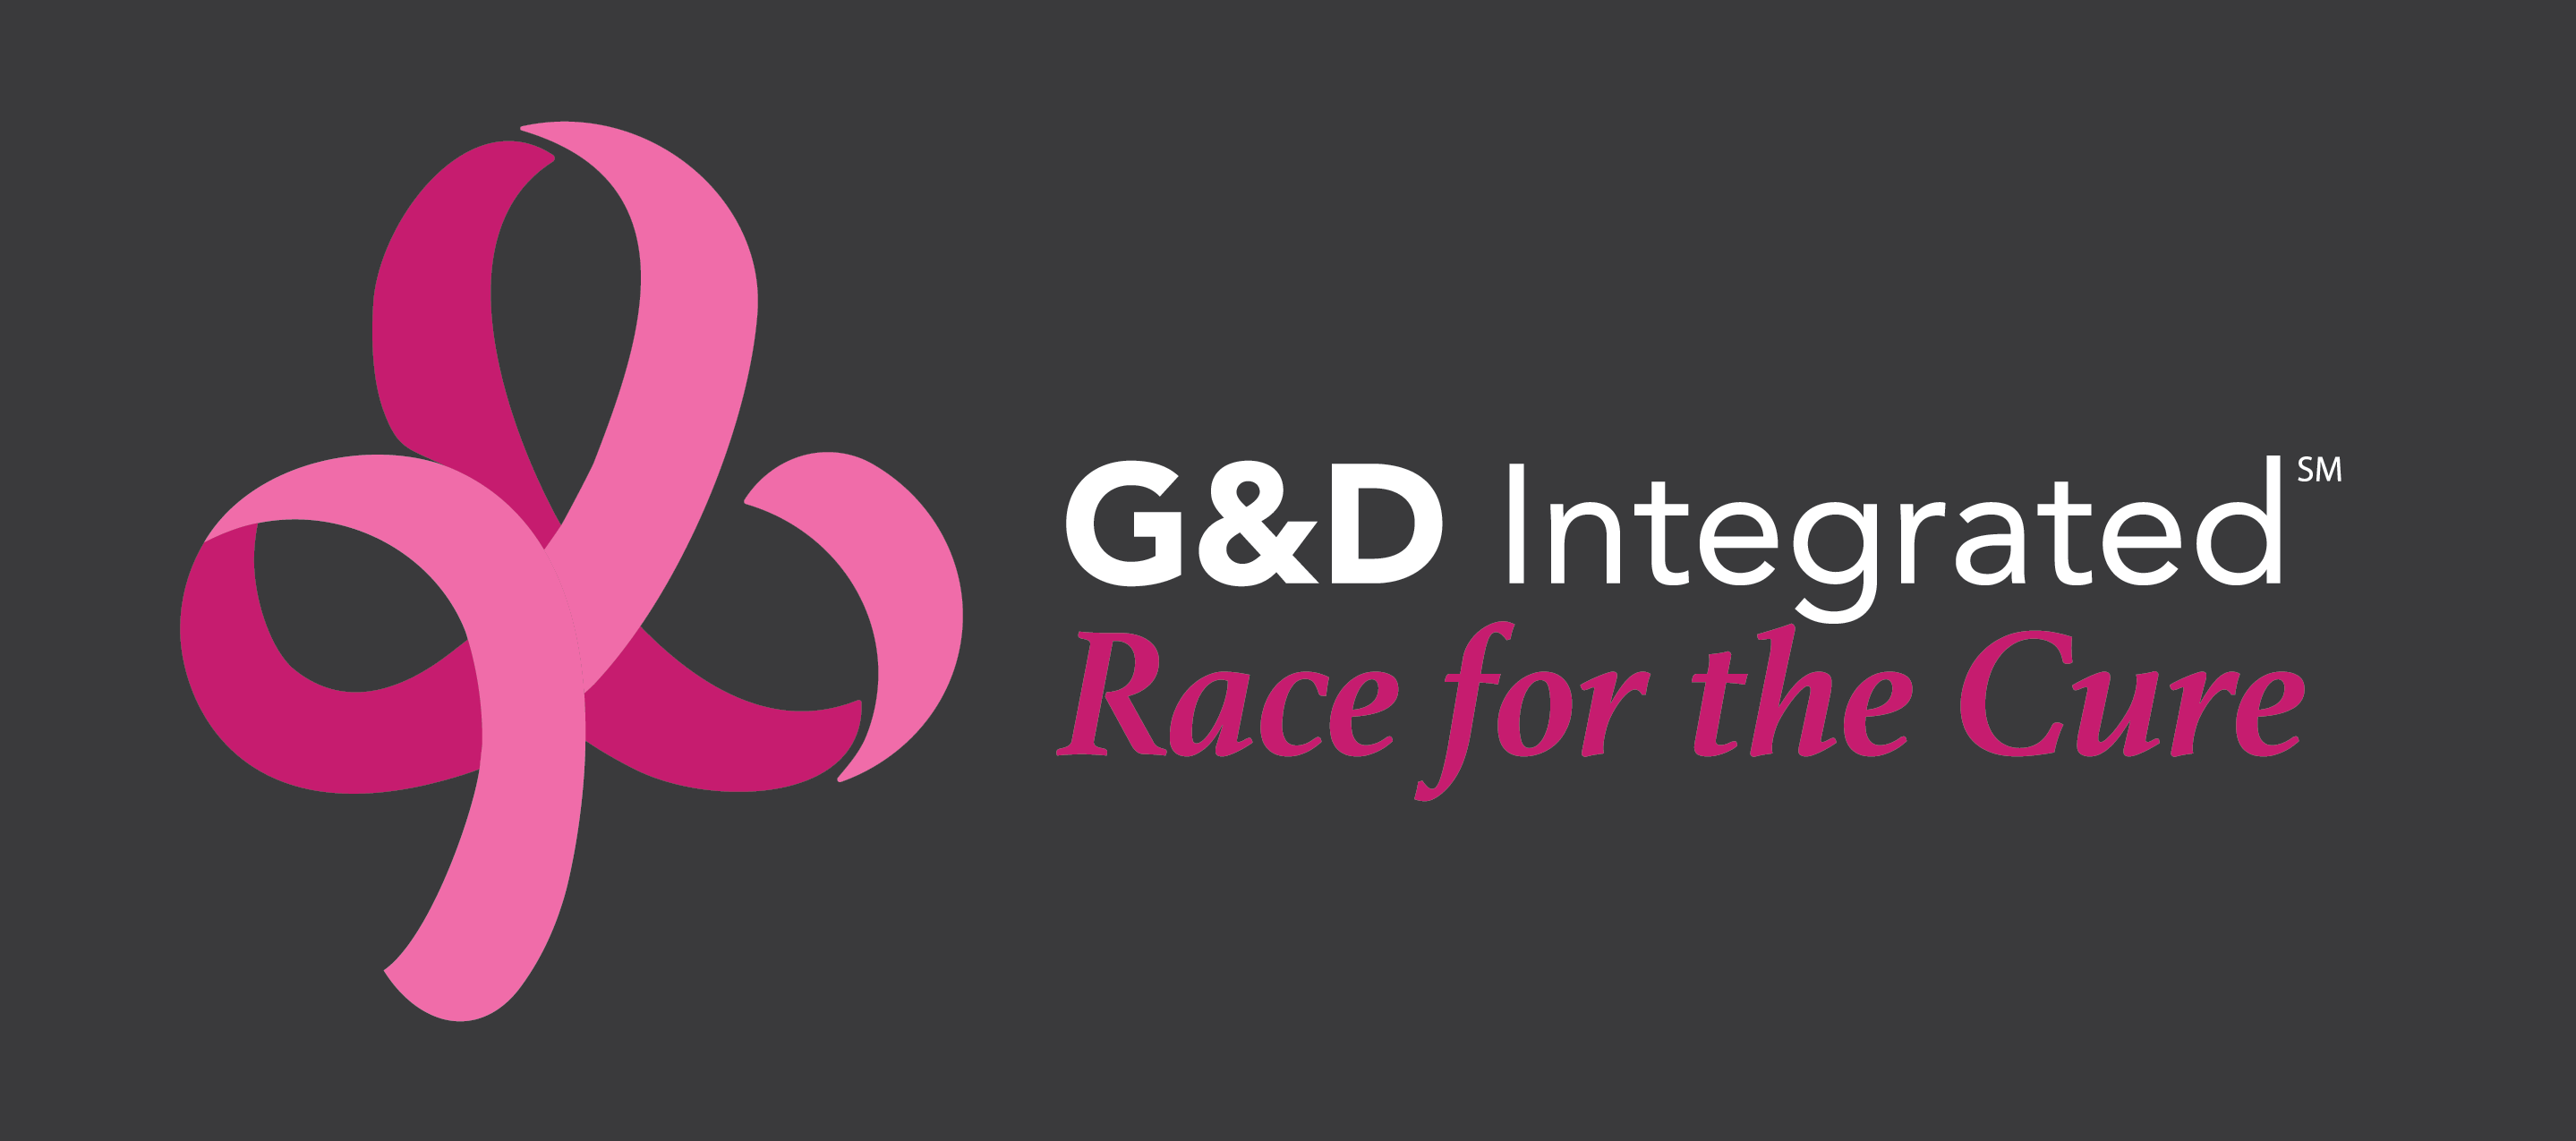 G&D Integrated Runs For Breast Cancer Awareness in Race For The Cure